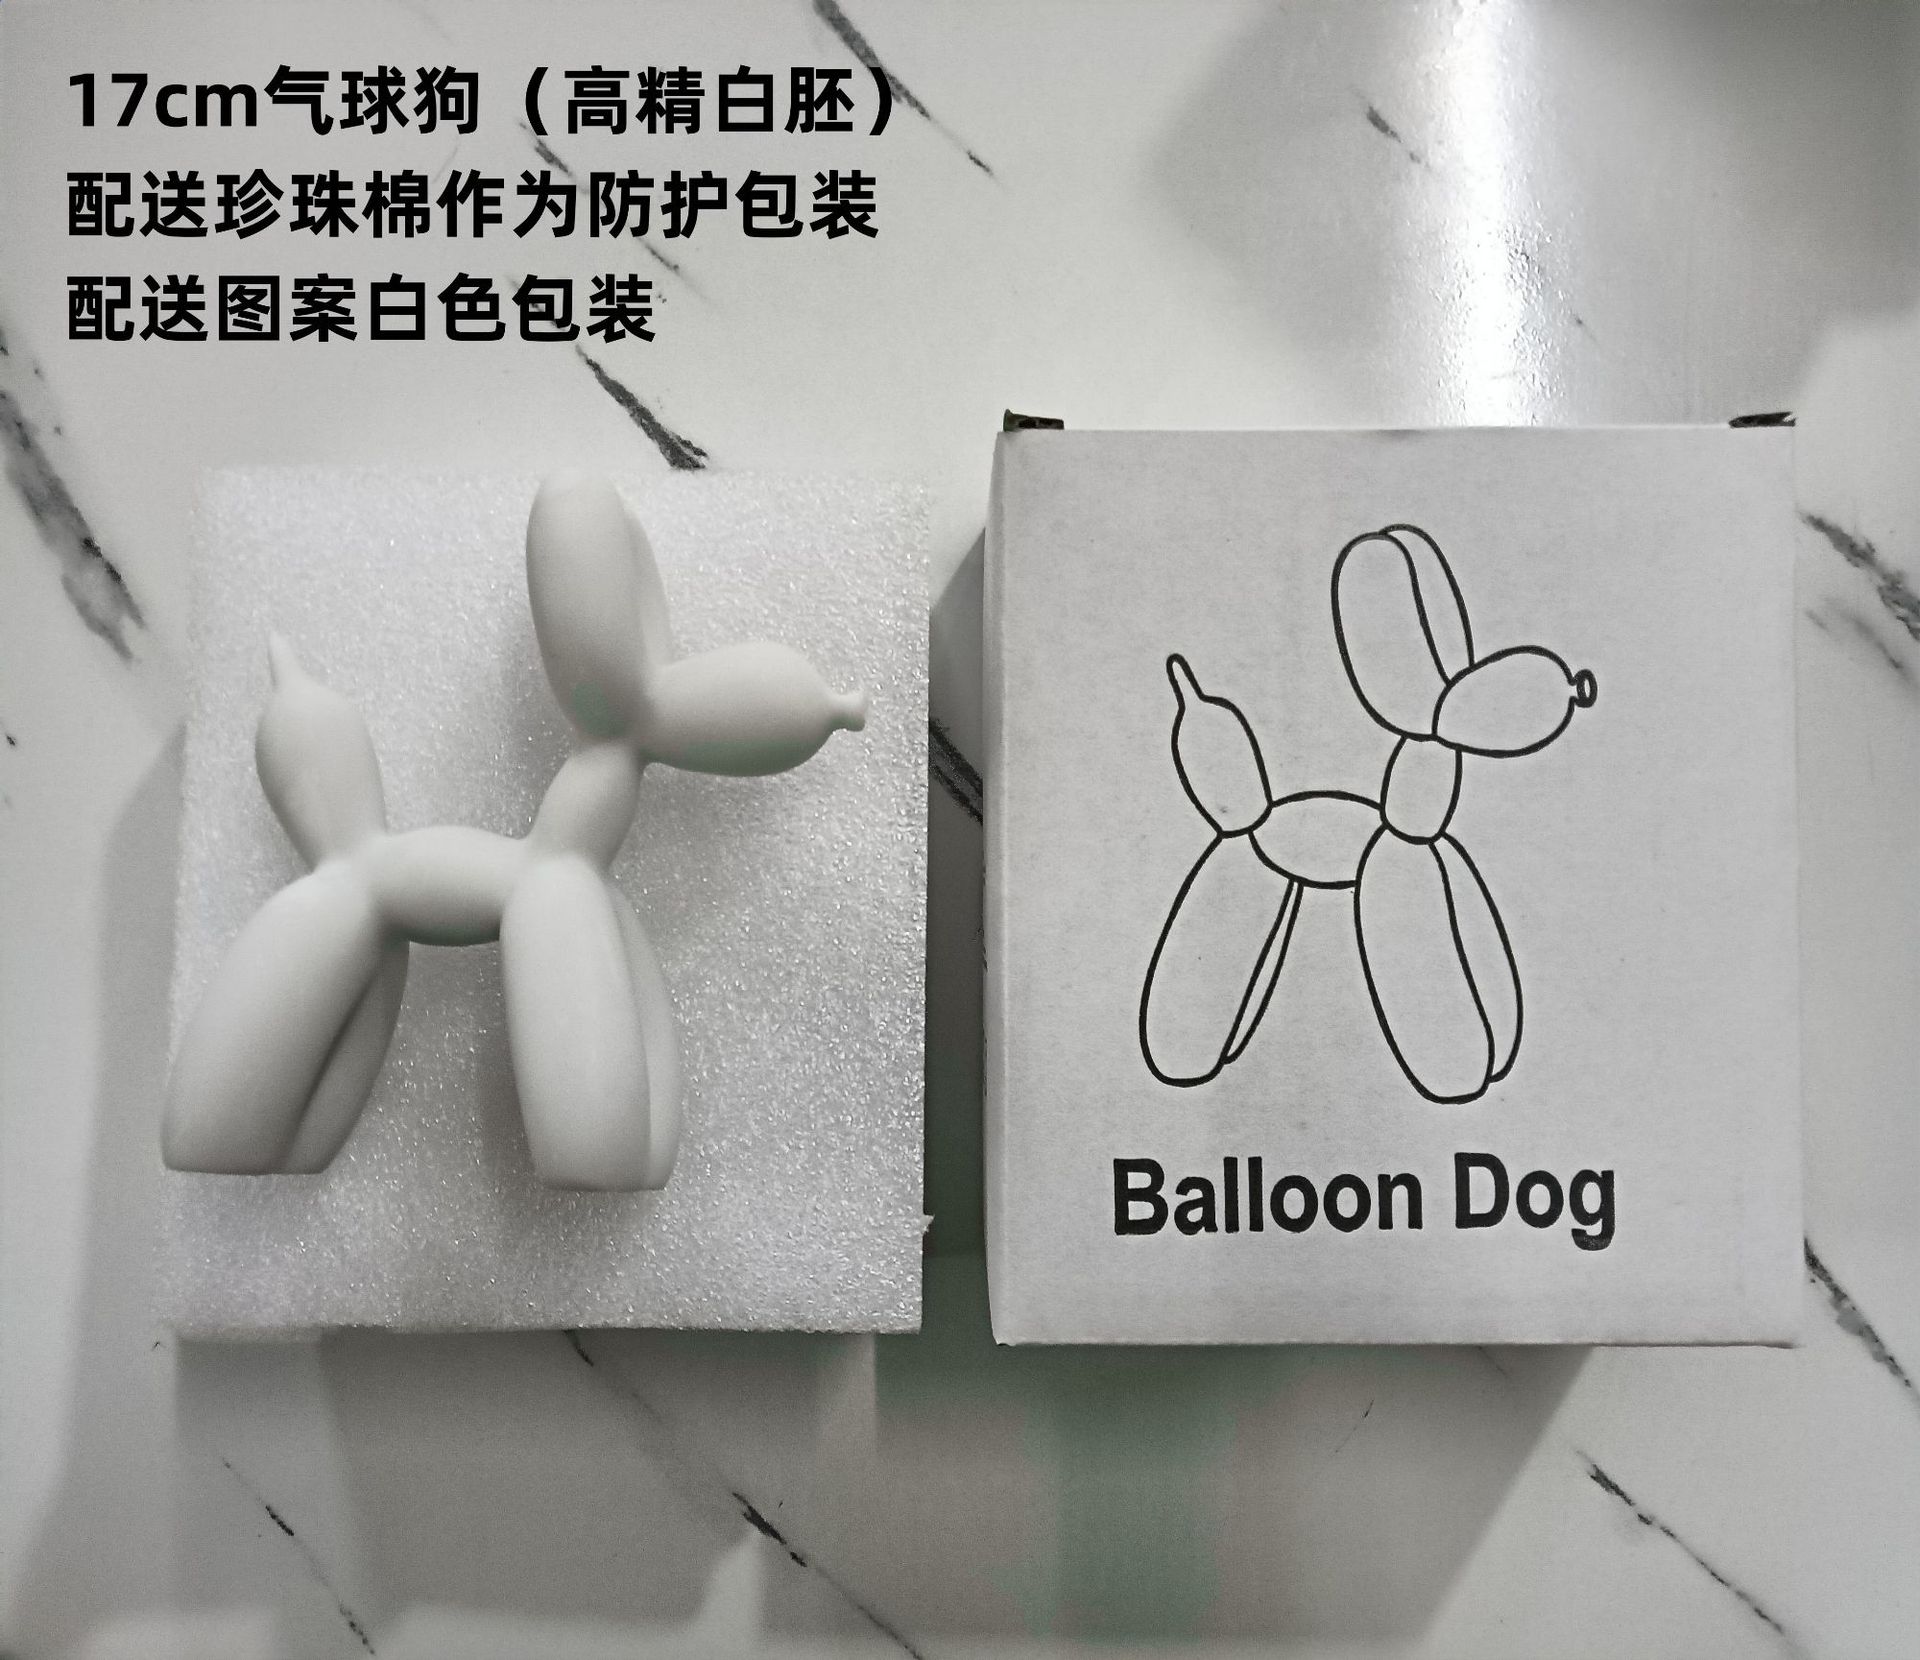 Cross-Border Fluid Balloon Dog White Body Kaws Violent Bear and Other White Body Large Quantity Contact Discount Fashion Play Art Ornaments